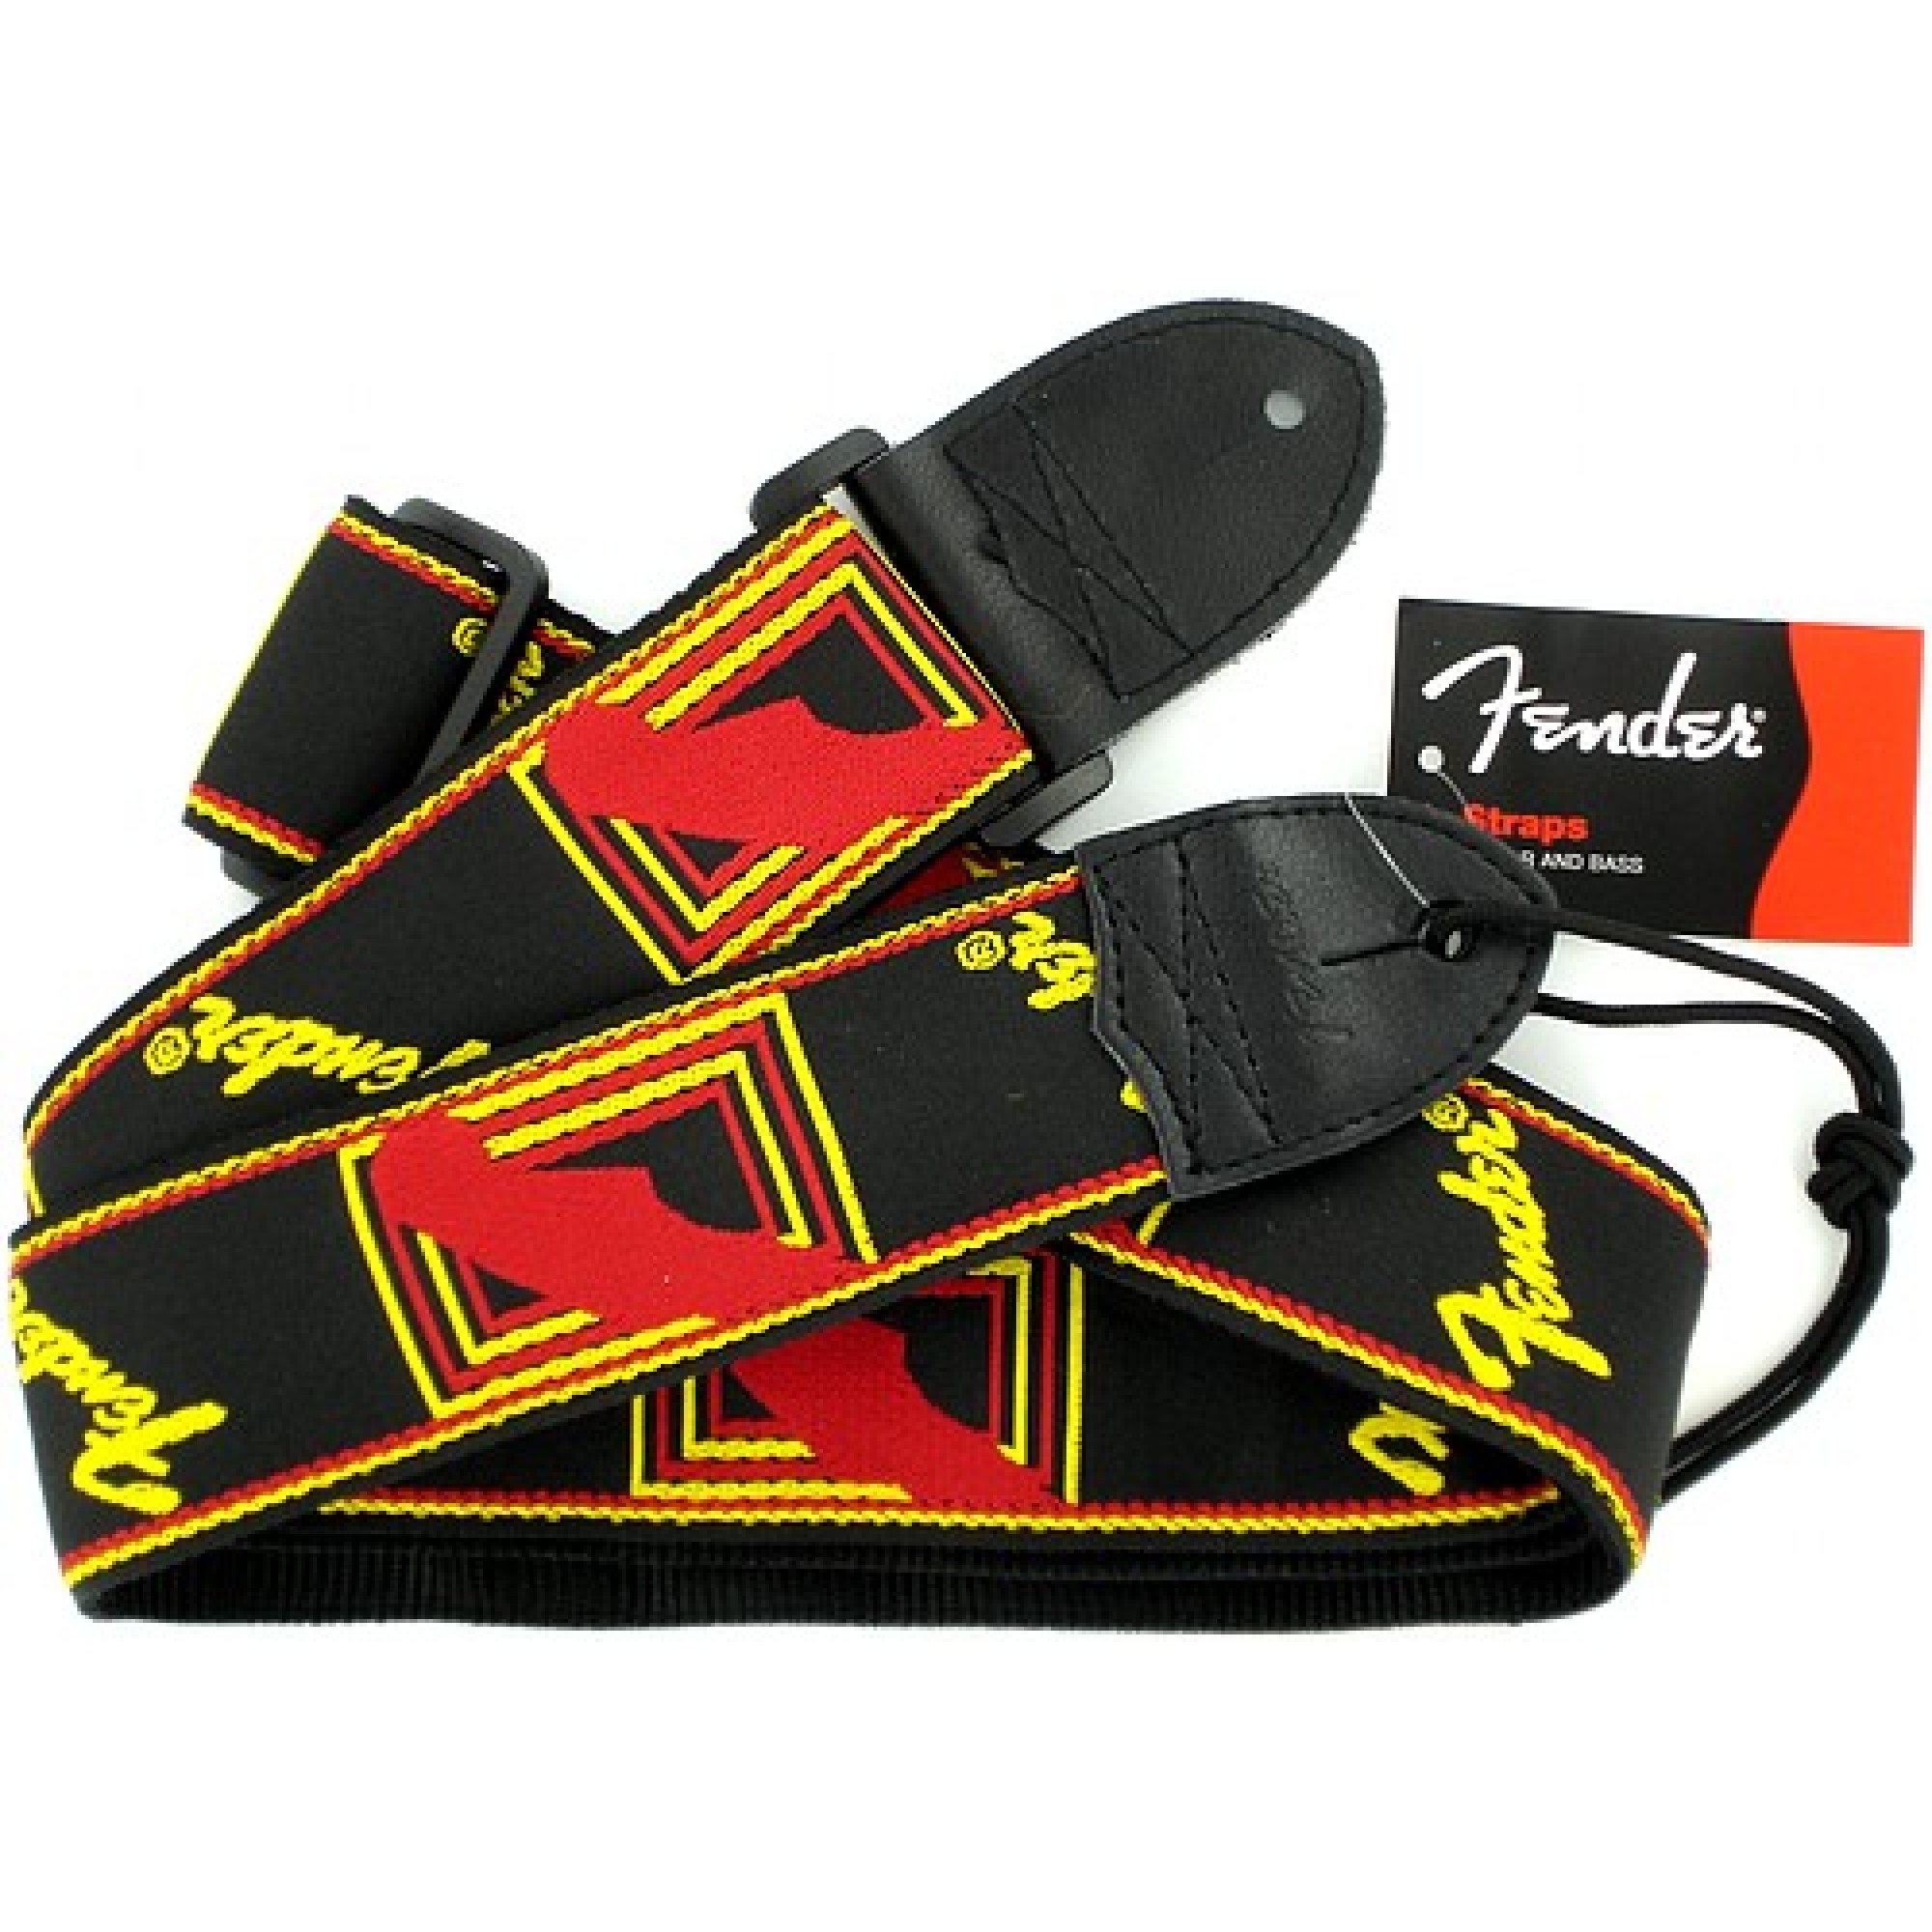 An image of Fender 2 Monogrammed Strap, Black, Yellow and Red | PMT Online